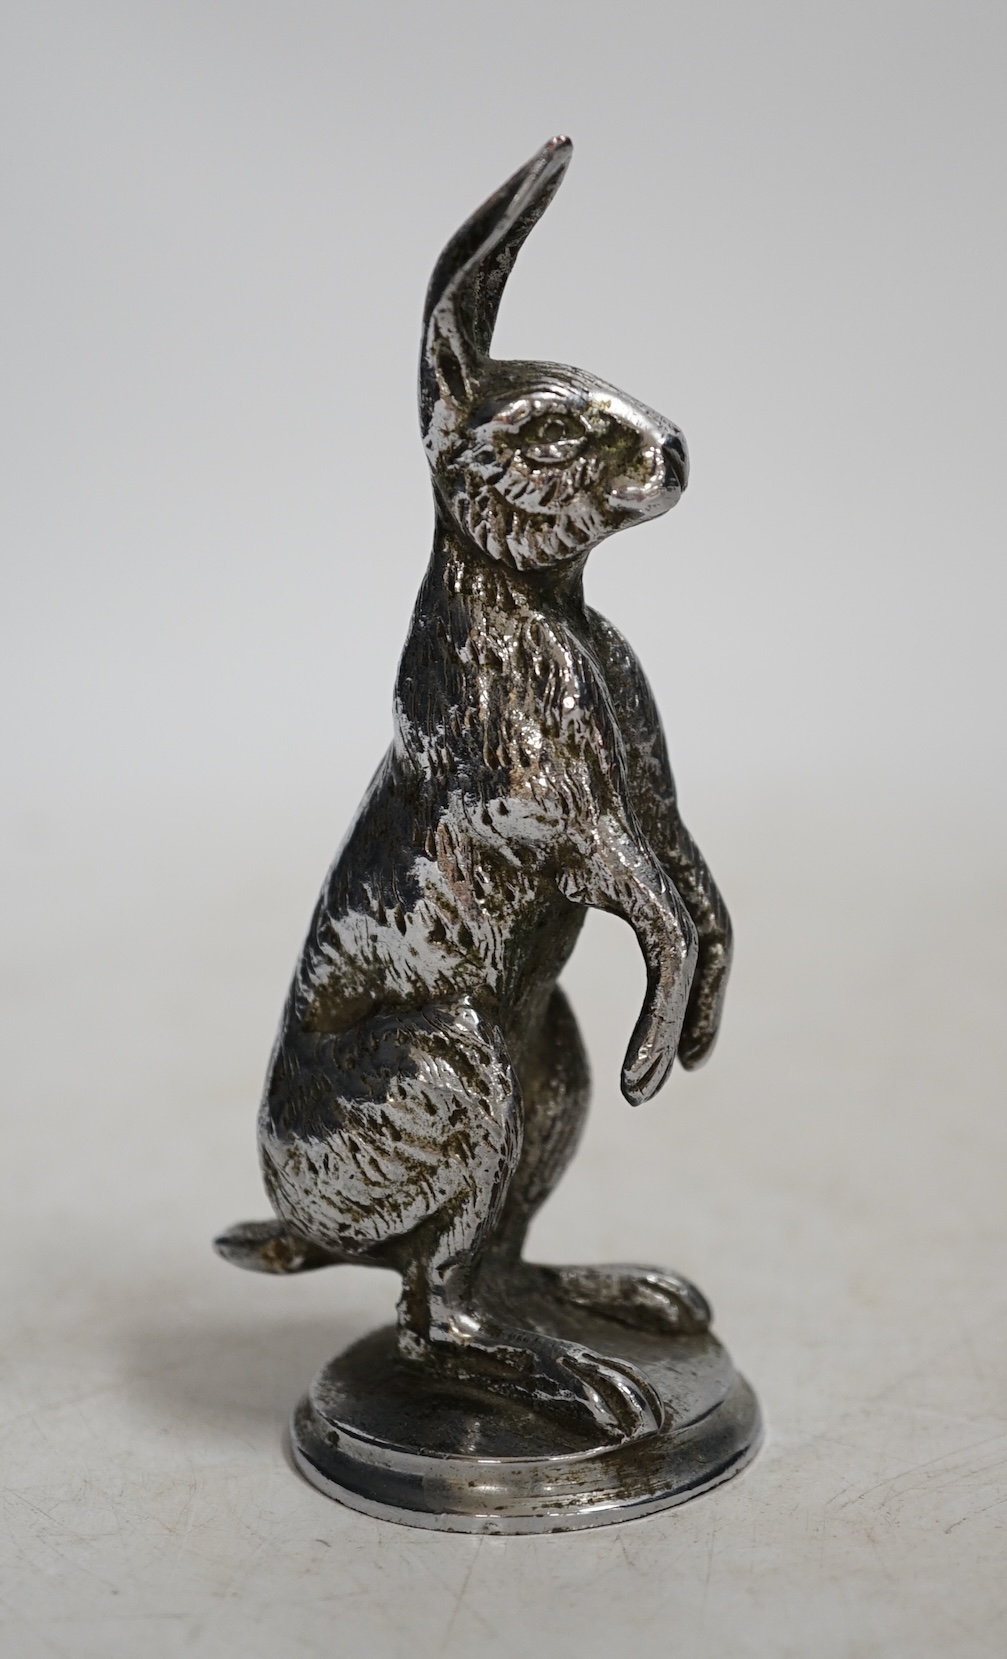 A mid 20th century chromed metal hare car mascot, 11cm high. Condition - good